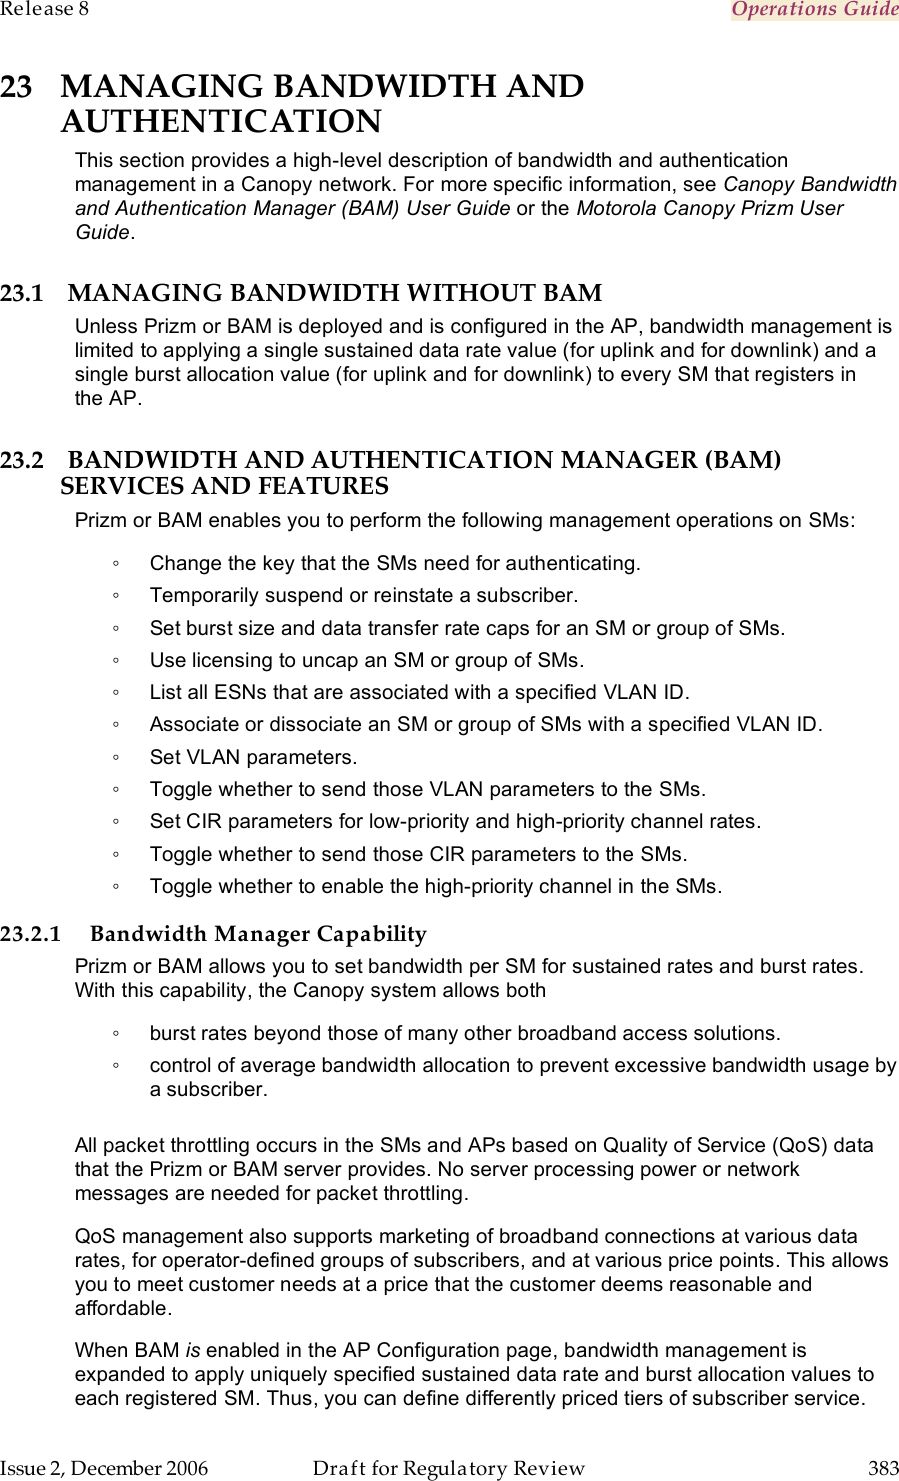 Release 8    Operations Guide   Issue 2, December 2006  Draft for Regulatory Review  383     23 MANAGING BANDWIDTH AND AUTHENTICATION This section provides a high-level description of bandwidth and authentication management in a Canopy network. For more specific information, see Canopy Bandwidth and Authentication Manager (BAM) User Guide or the Motorola Canopy Prizm User Guide. 23.1 MANAGING BANDWIDTH WITHOUT BAM Unless Prizm or BAM is deployed and is configured in the AP, bandwidth management is limited to applying a single sustained data rate value (for uplink and for downlink) and a single burst allocation value (for uplink and for downlink) to every SM that registers in the AP. 23.2 BANDWIDTH AND AUTHENTICATION MANAGER (BAM) SERVICES AND FEATURES Prizm or BAM enables you to perform the following management operations on SMs: ◦  Change the key that the SMs need for authenticating. ◦  Temporarily suspend or reinstate a subscriber. ◦  Set burst size and data transfer rate caps for an SM or group of SMs. ◦  Use licensing to uncap an SM or group of SMs. ◦  List all ESNs that are associated with a specified VLAN ID. ◦  Associate or dissociate an SM or group of SMs with a specified VLAN ID. ◦  Set VLAN parameters. ◦  Toggle whether to send those VLAN parameters to the SMs. ◦  Set CIR parameters for low-priority and high-priority channel rates. ◦  Toggle whether to send those CIR parameters to the SMs. ◦  Toggle whether to enable the high-priority channel in the SMs. 23.2.1 Bandwidth Manager Capability Prizm or BAM allows you to set bandwidth per SM for sustained rates and burst rates. With this capability, the Canopy system allows both ◦  burst rates beyond those of many other broadband access solutions. ◦  control of average bandwidth allocation to prevent excessive bandwidth usage by a subscriber.  All packet throttling occurs in the SMs and APs based on Quality of Service (QoS) data that the Prizm or BAM server provides. No server processing power or network messages are needed for packet throttling. QoS management also supports marketing of broadband connections at various data rates, for operator-defined groups of subscribers, and at various price points. This allows you to meet customer needs at a price that the customer deems reasonable and affordable. When BAM is enabled in the AP Configuration page, bandwidth management is expanded to apply uniquely specified sustained data rate and burst allocation values to each registered SM. Thus, you can define differently priced tiers of subscriber service. 